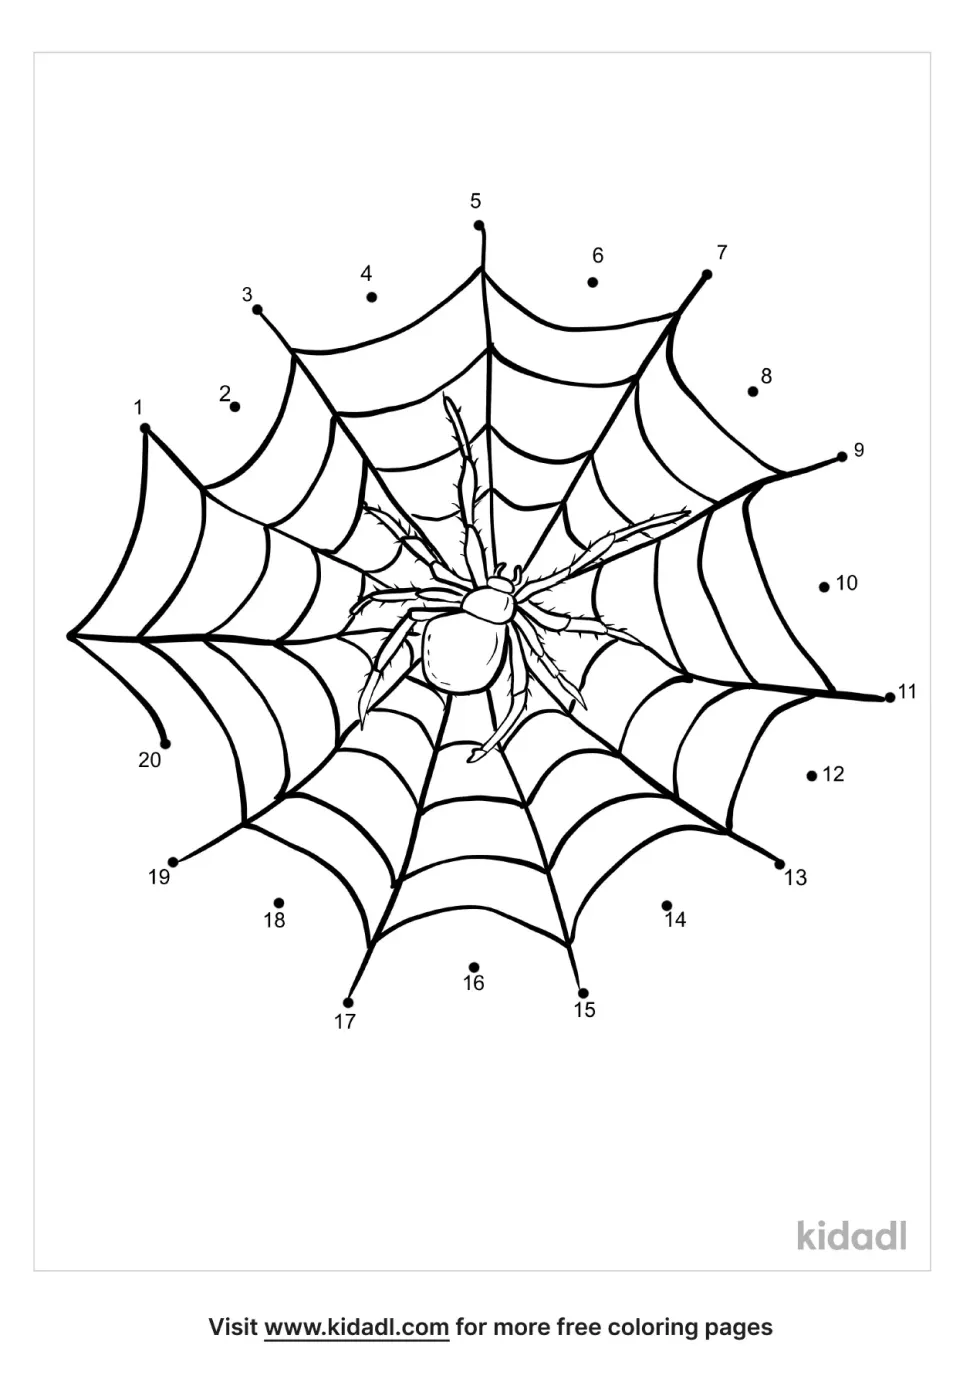 Spider Web Dot To Dot (Easy)